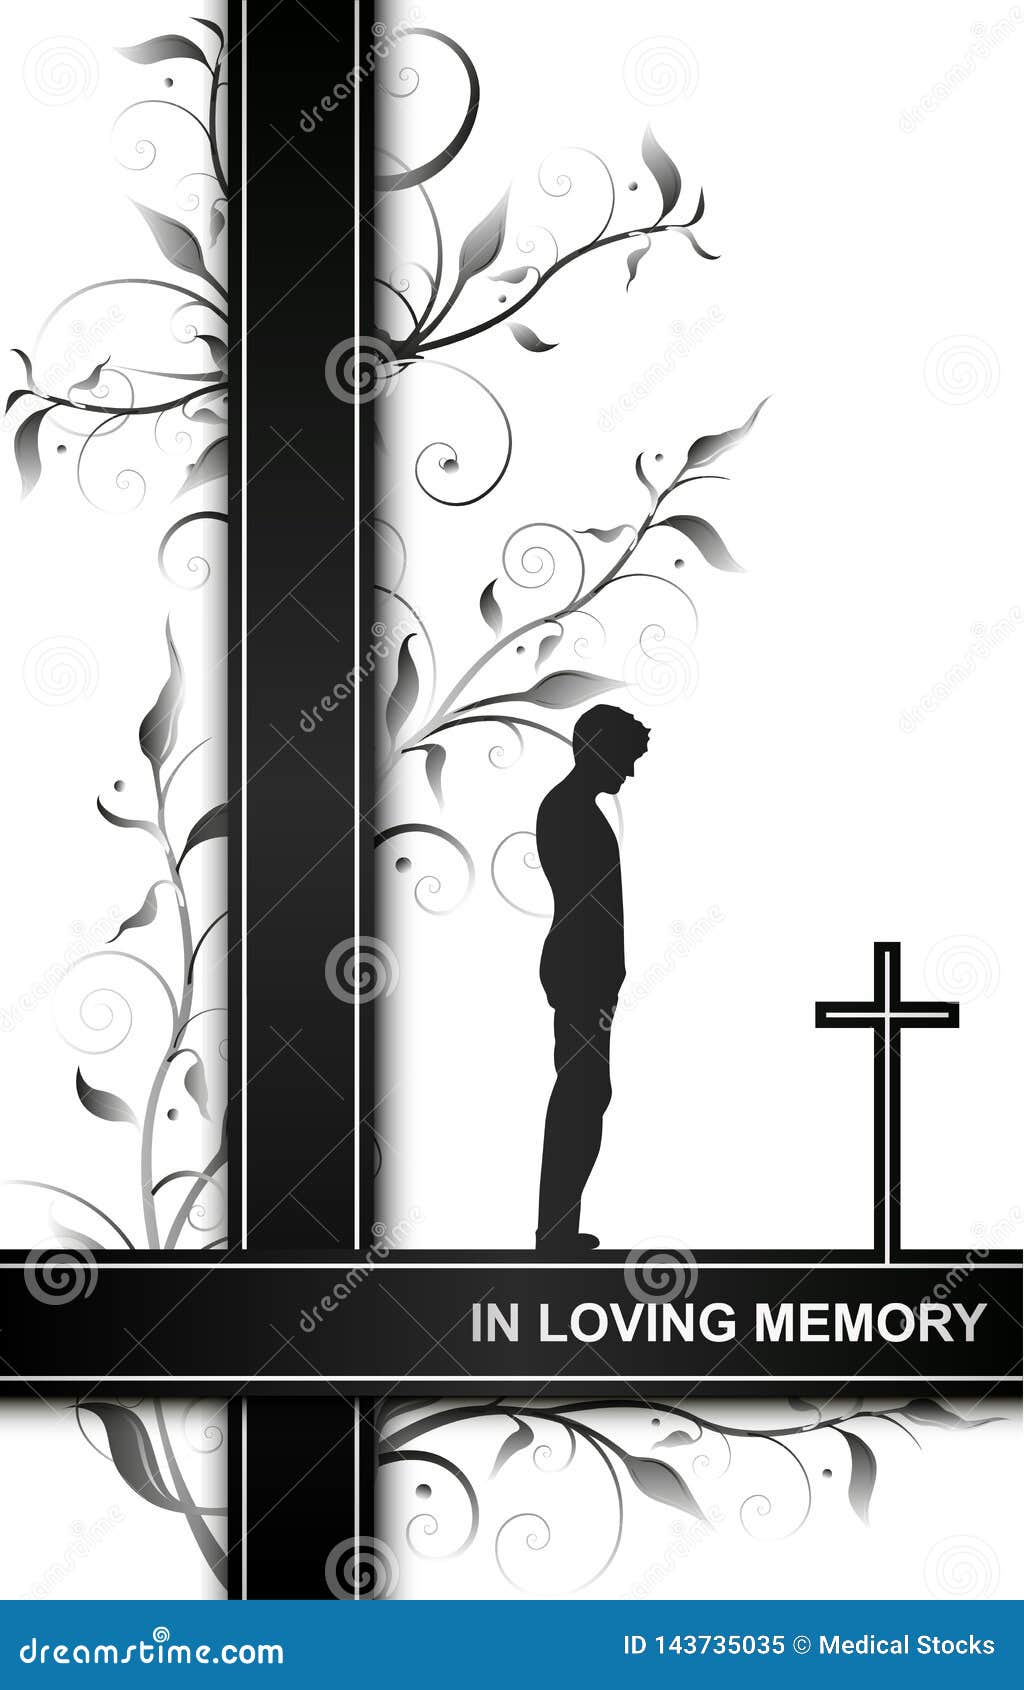 mourning card in loving memory with a man on a cross and floral s  on white background